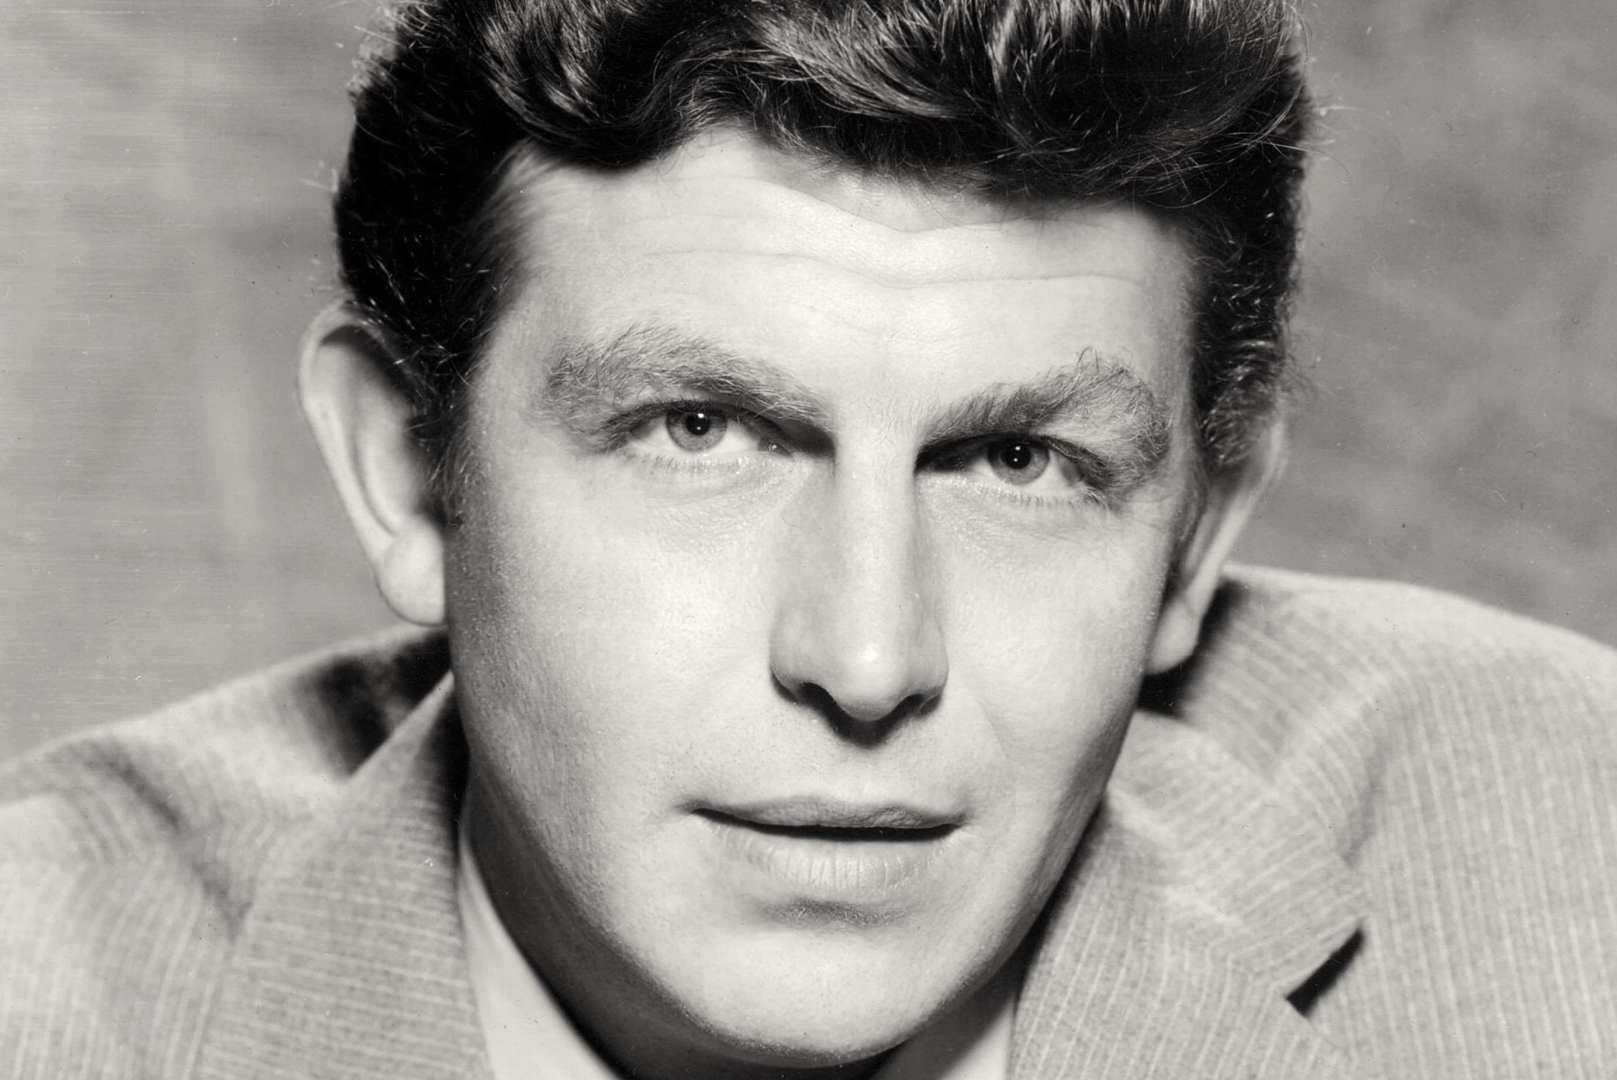 Andy Griffith headshot - Andy Griffith Net Worth